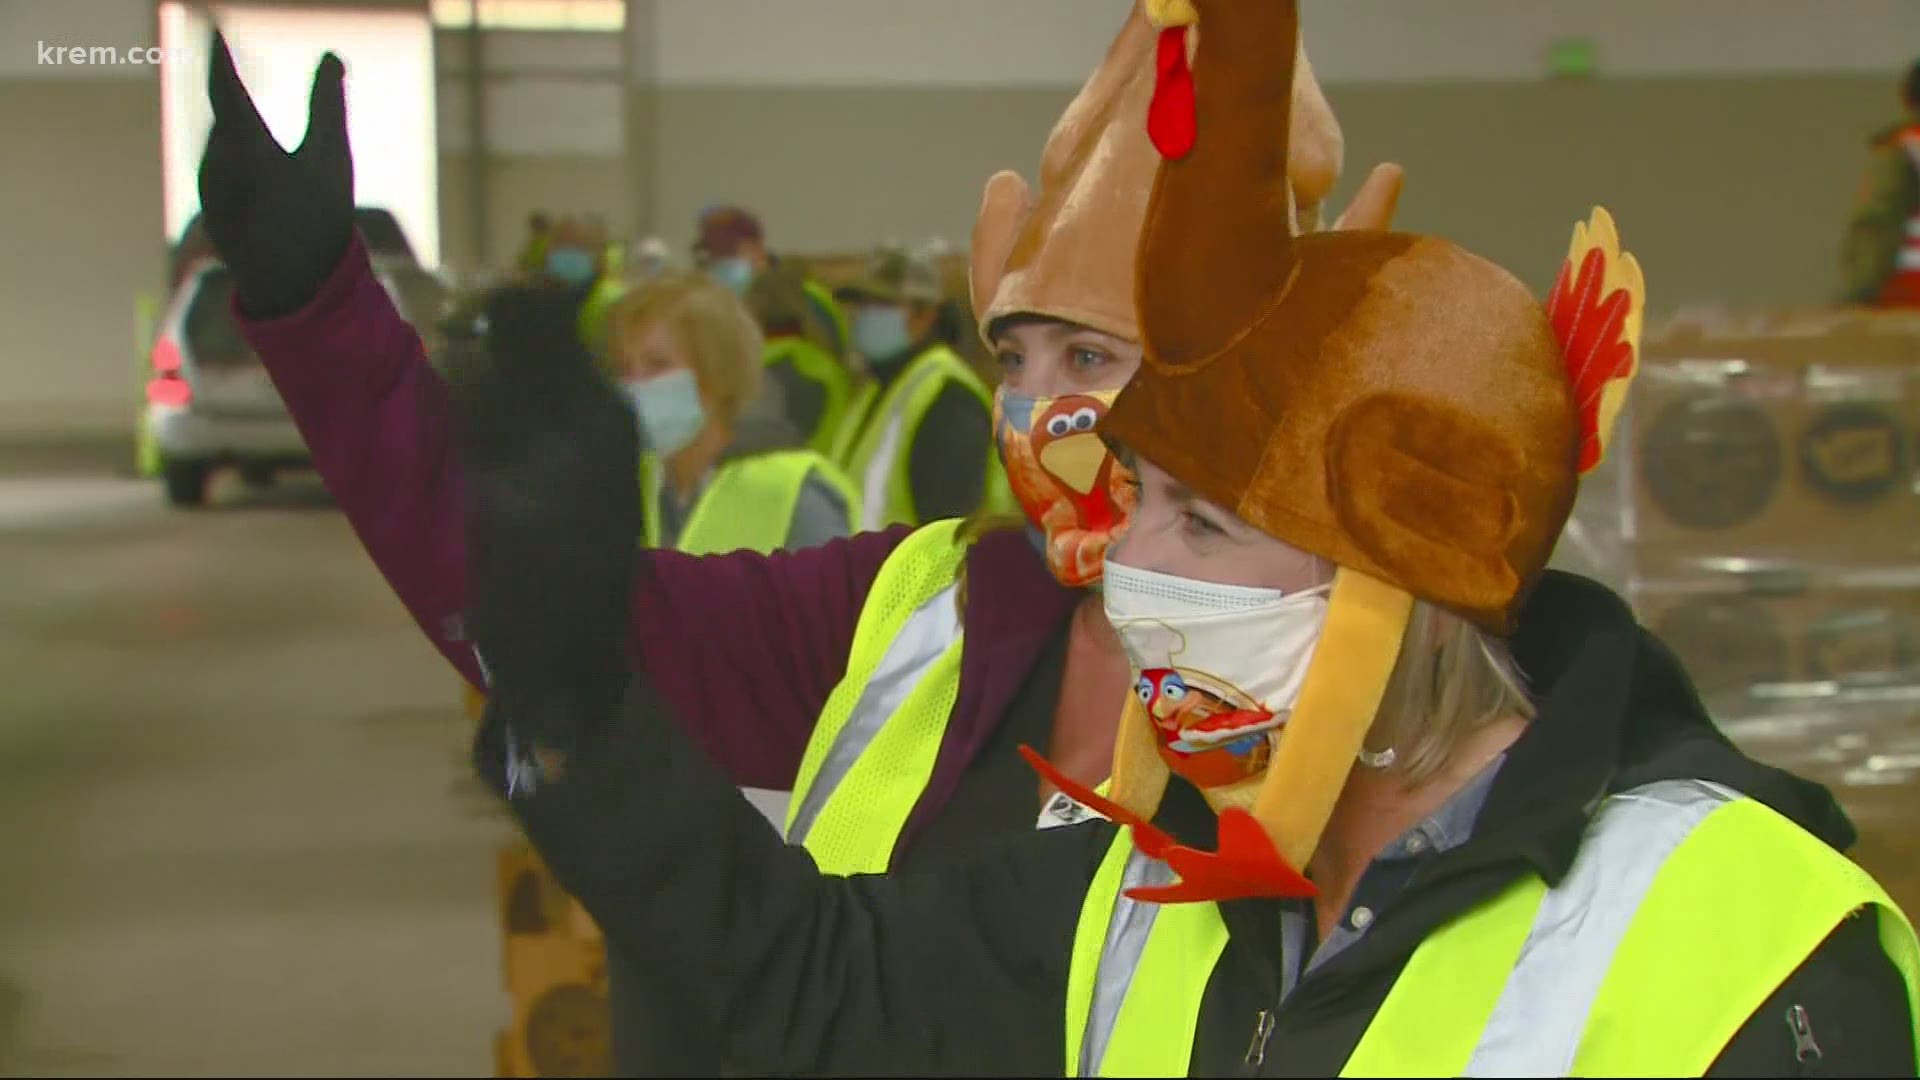 Before 3 p.m. 11,000 Thanksgiving dinners were handed out for families in need.